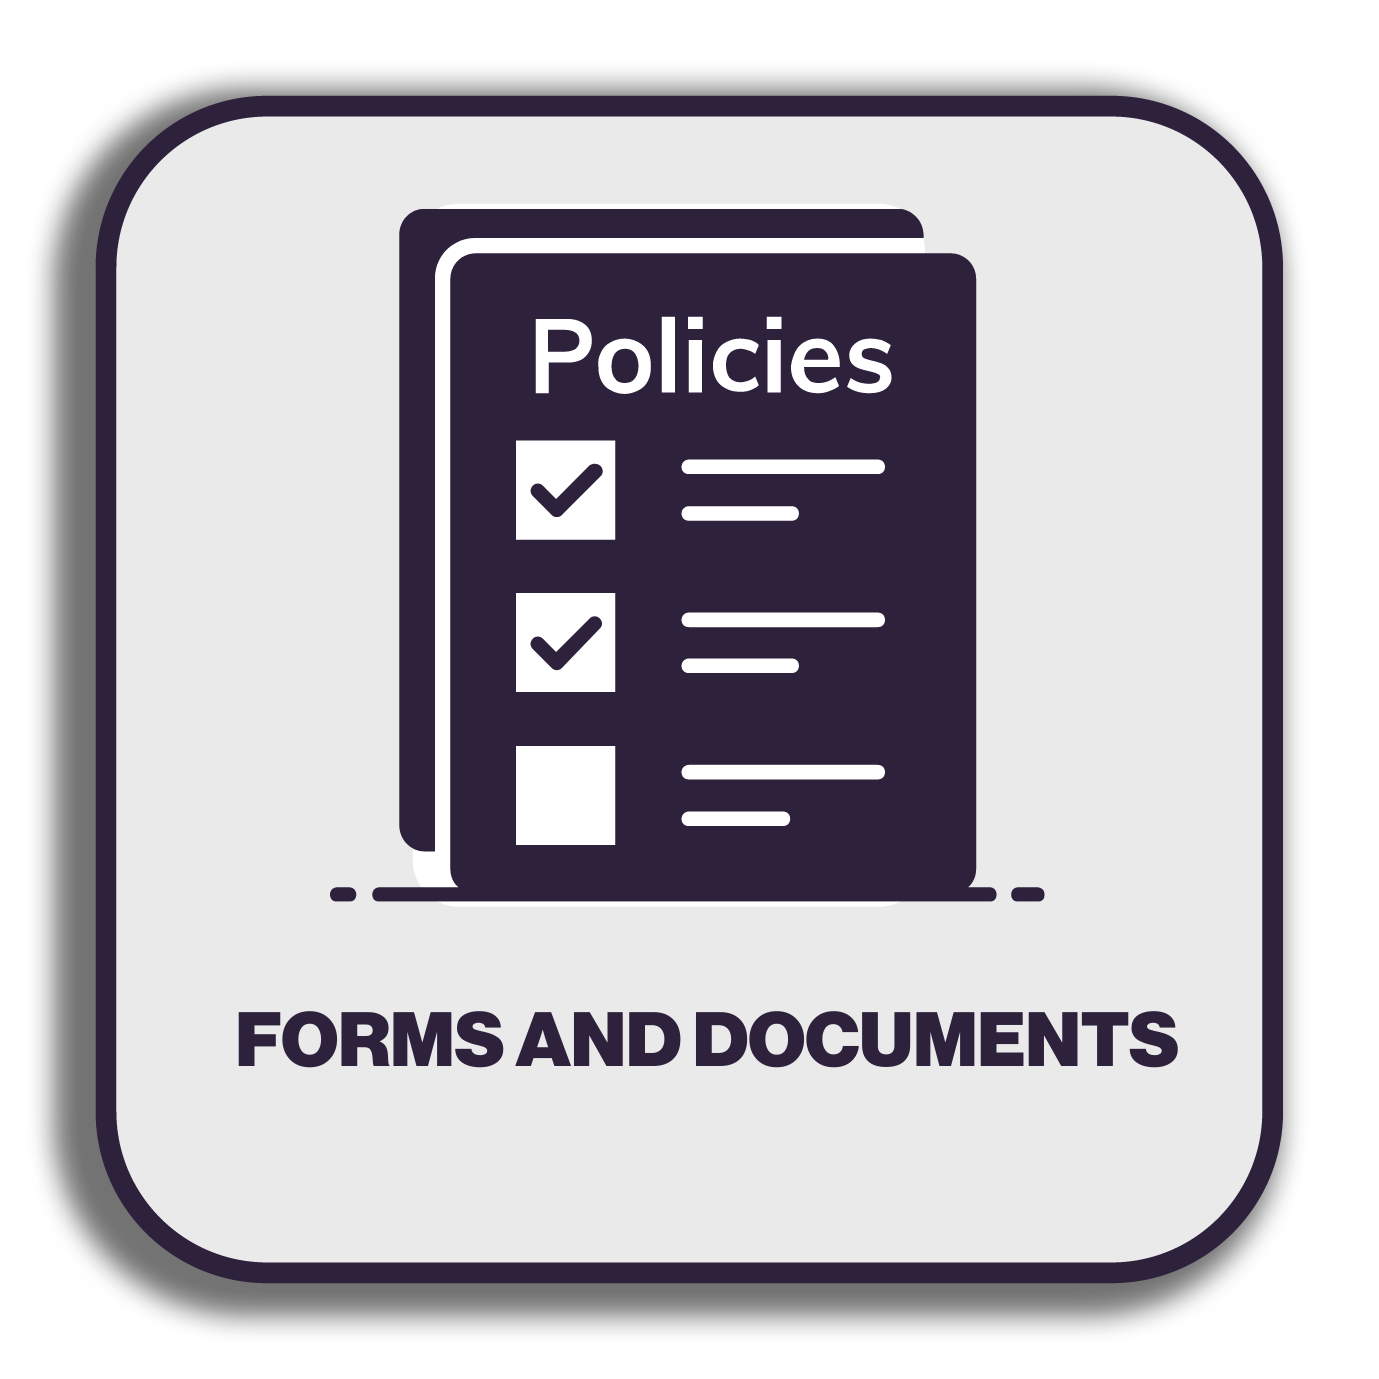 Forms and Documents